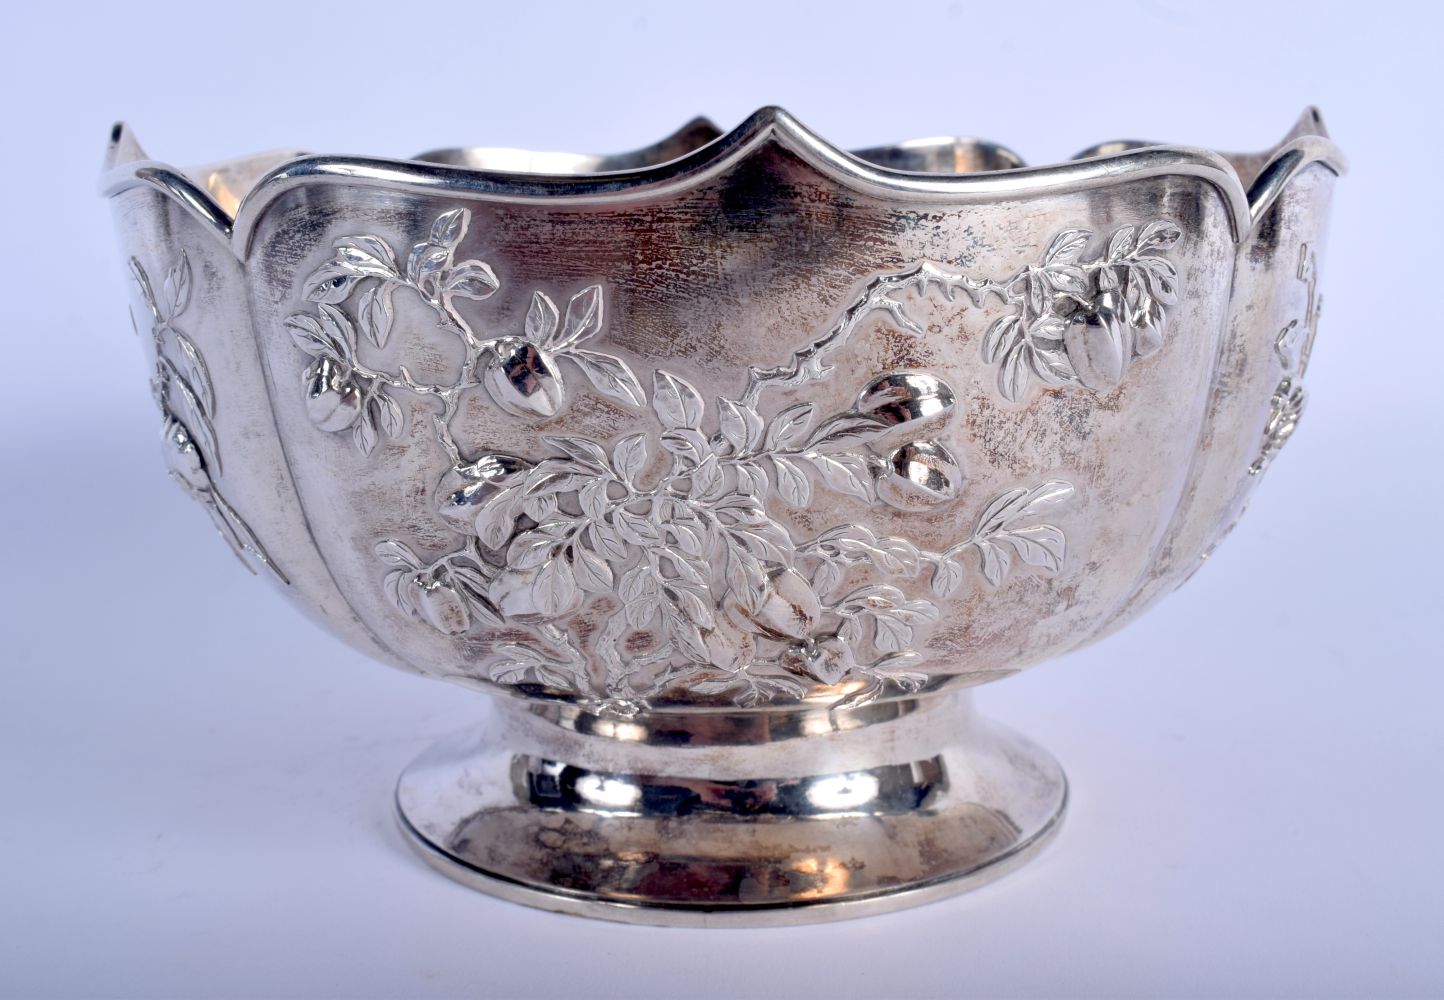 A LATE 19TH CENTURY CHINESE SCALLOPED SILVER BOWL by Zeewo, decorated with foliage and vines. 558 gr